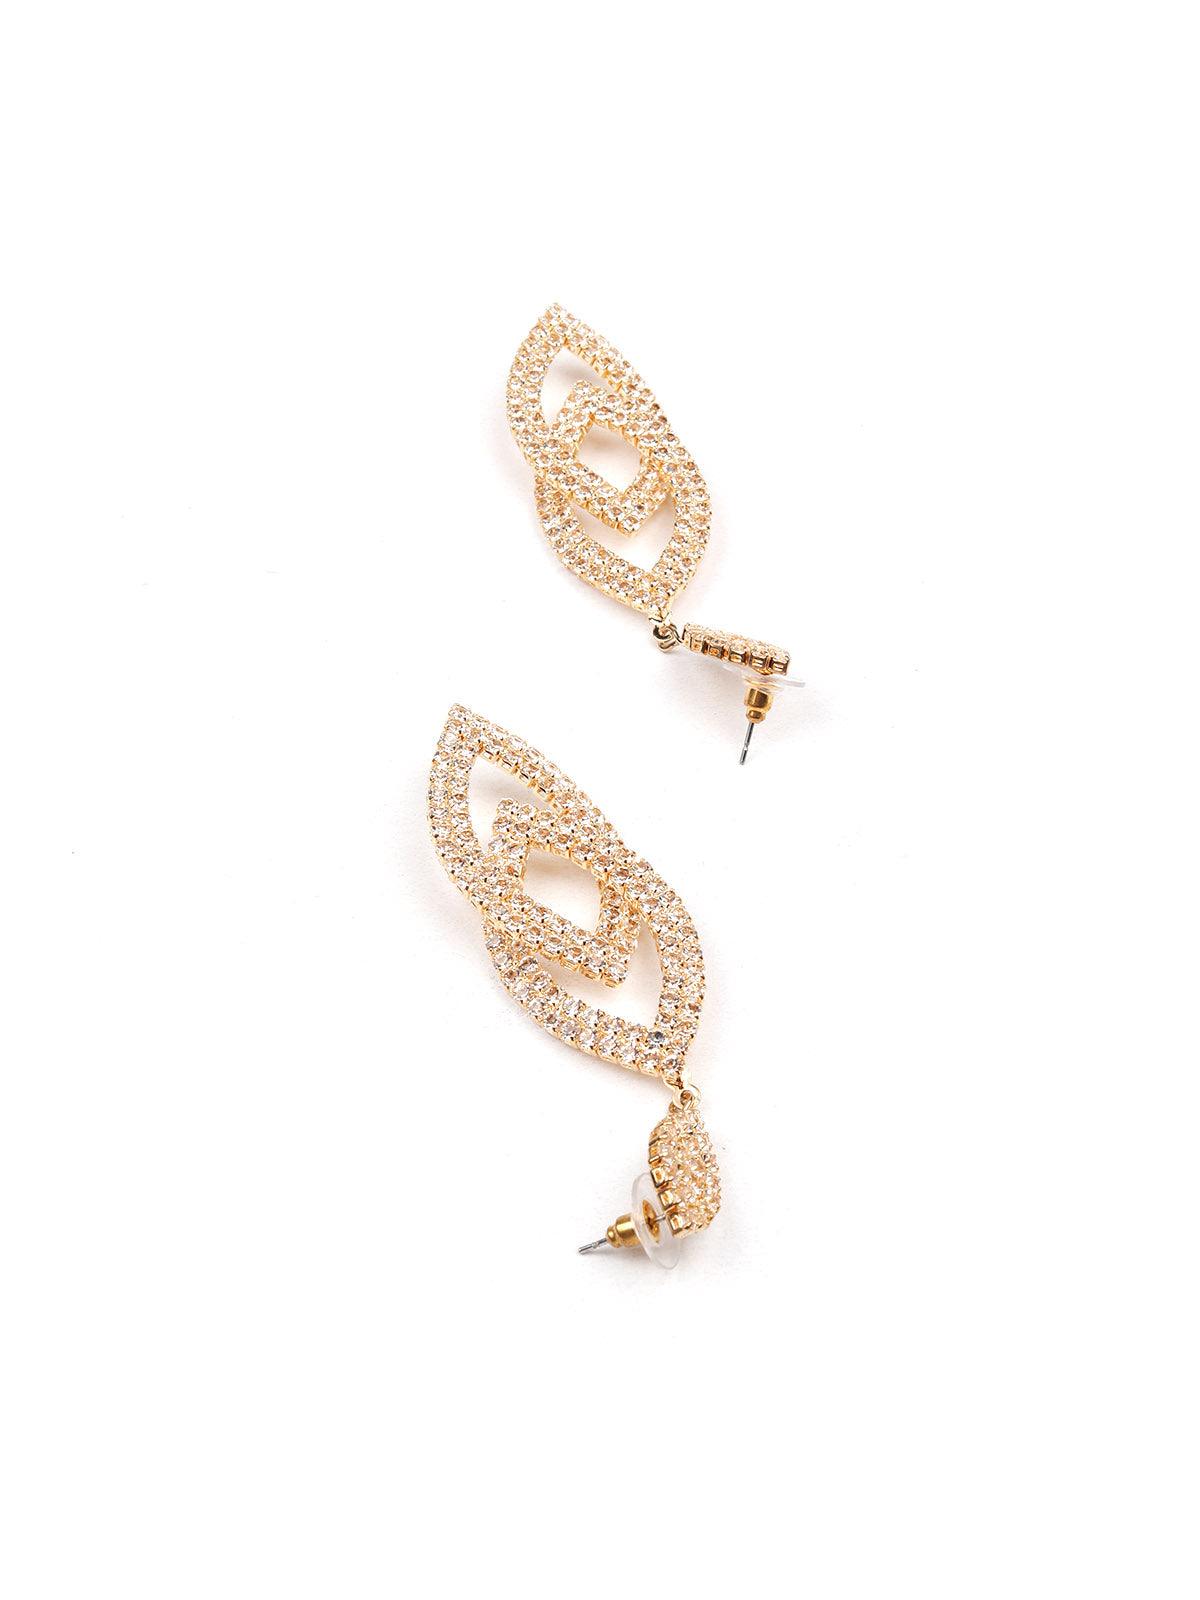 Women's Gold-Tone Studded Overlapping Gorgeous Statement Earrings - Odette